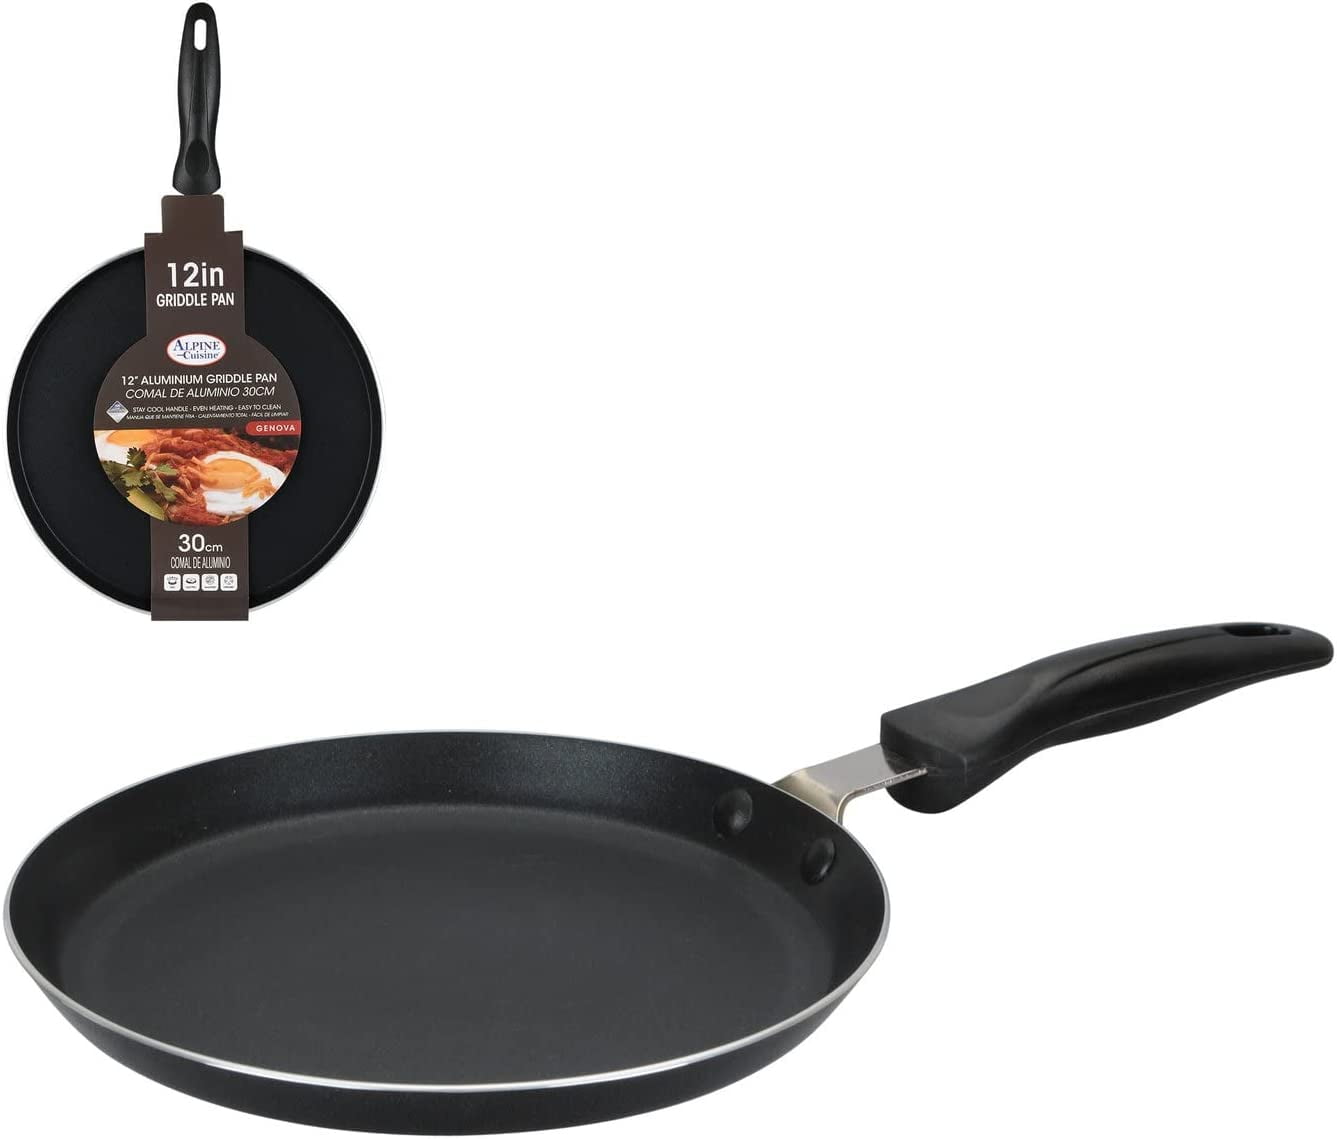 Alpine Cuisine Griddle Pan Aluminum 9-Inch Nonstick Coating, Griddle Pan  for Stove Top with Stay Cool Handle, PFOA Free, nonstick cookware 